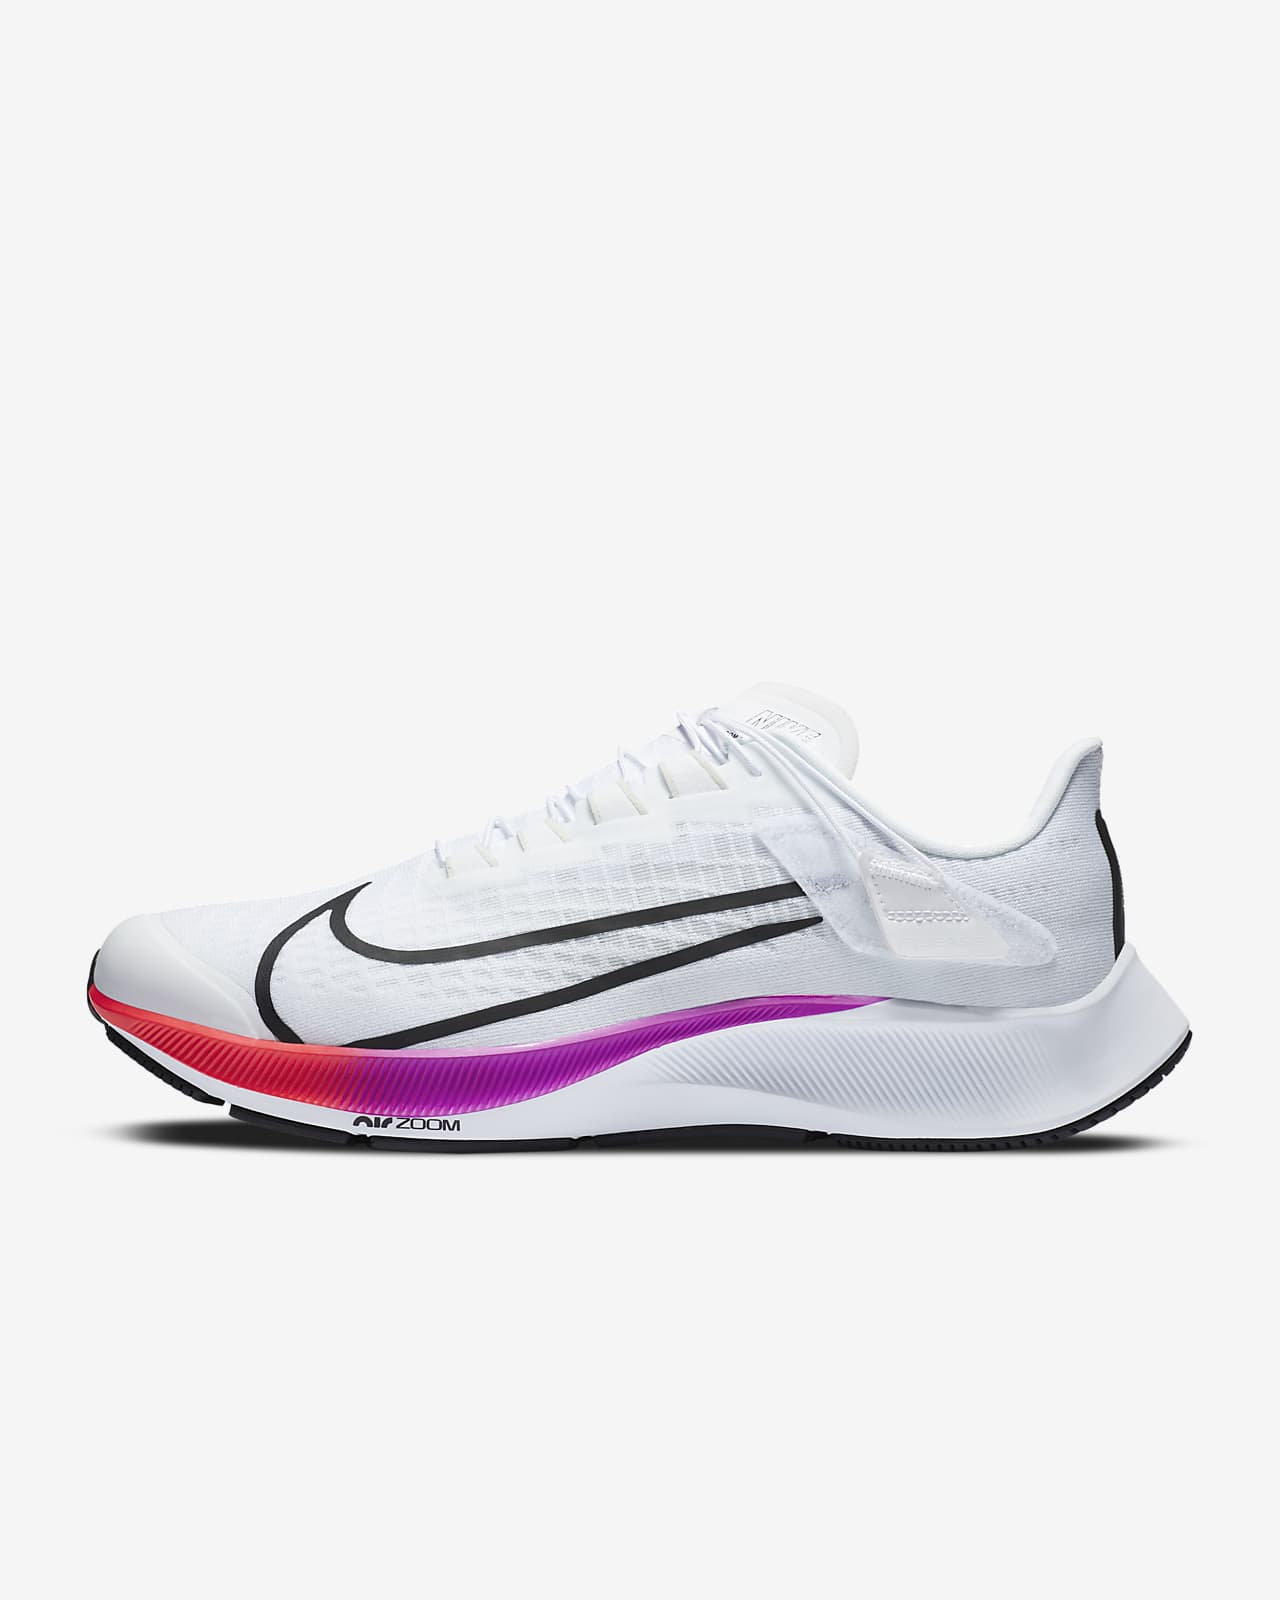 nike wide running shoes